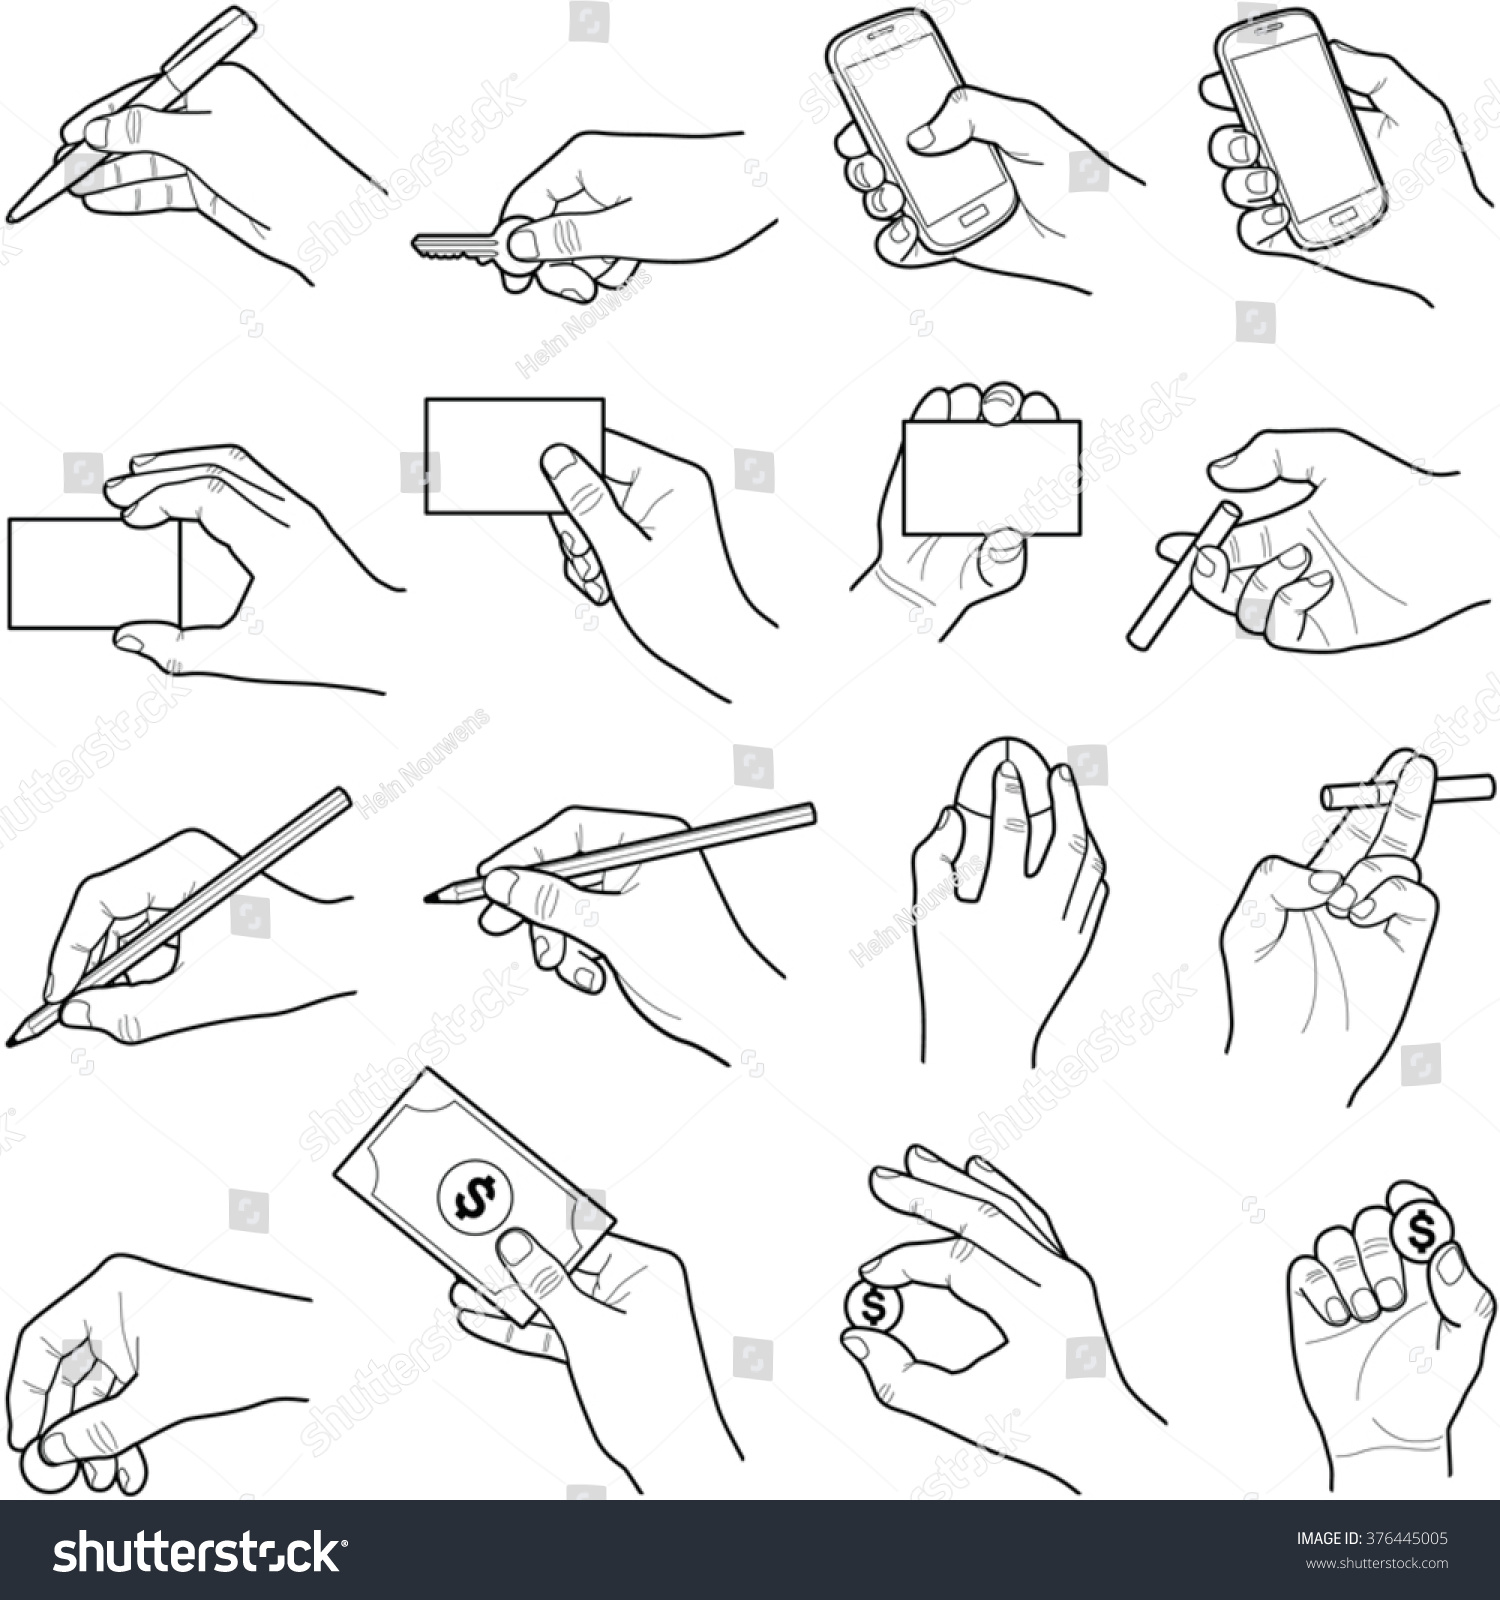 Hand Collection Vector Line Illustration Stock Vector (Royalty Free